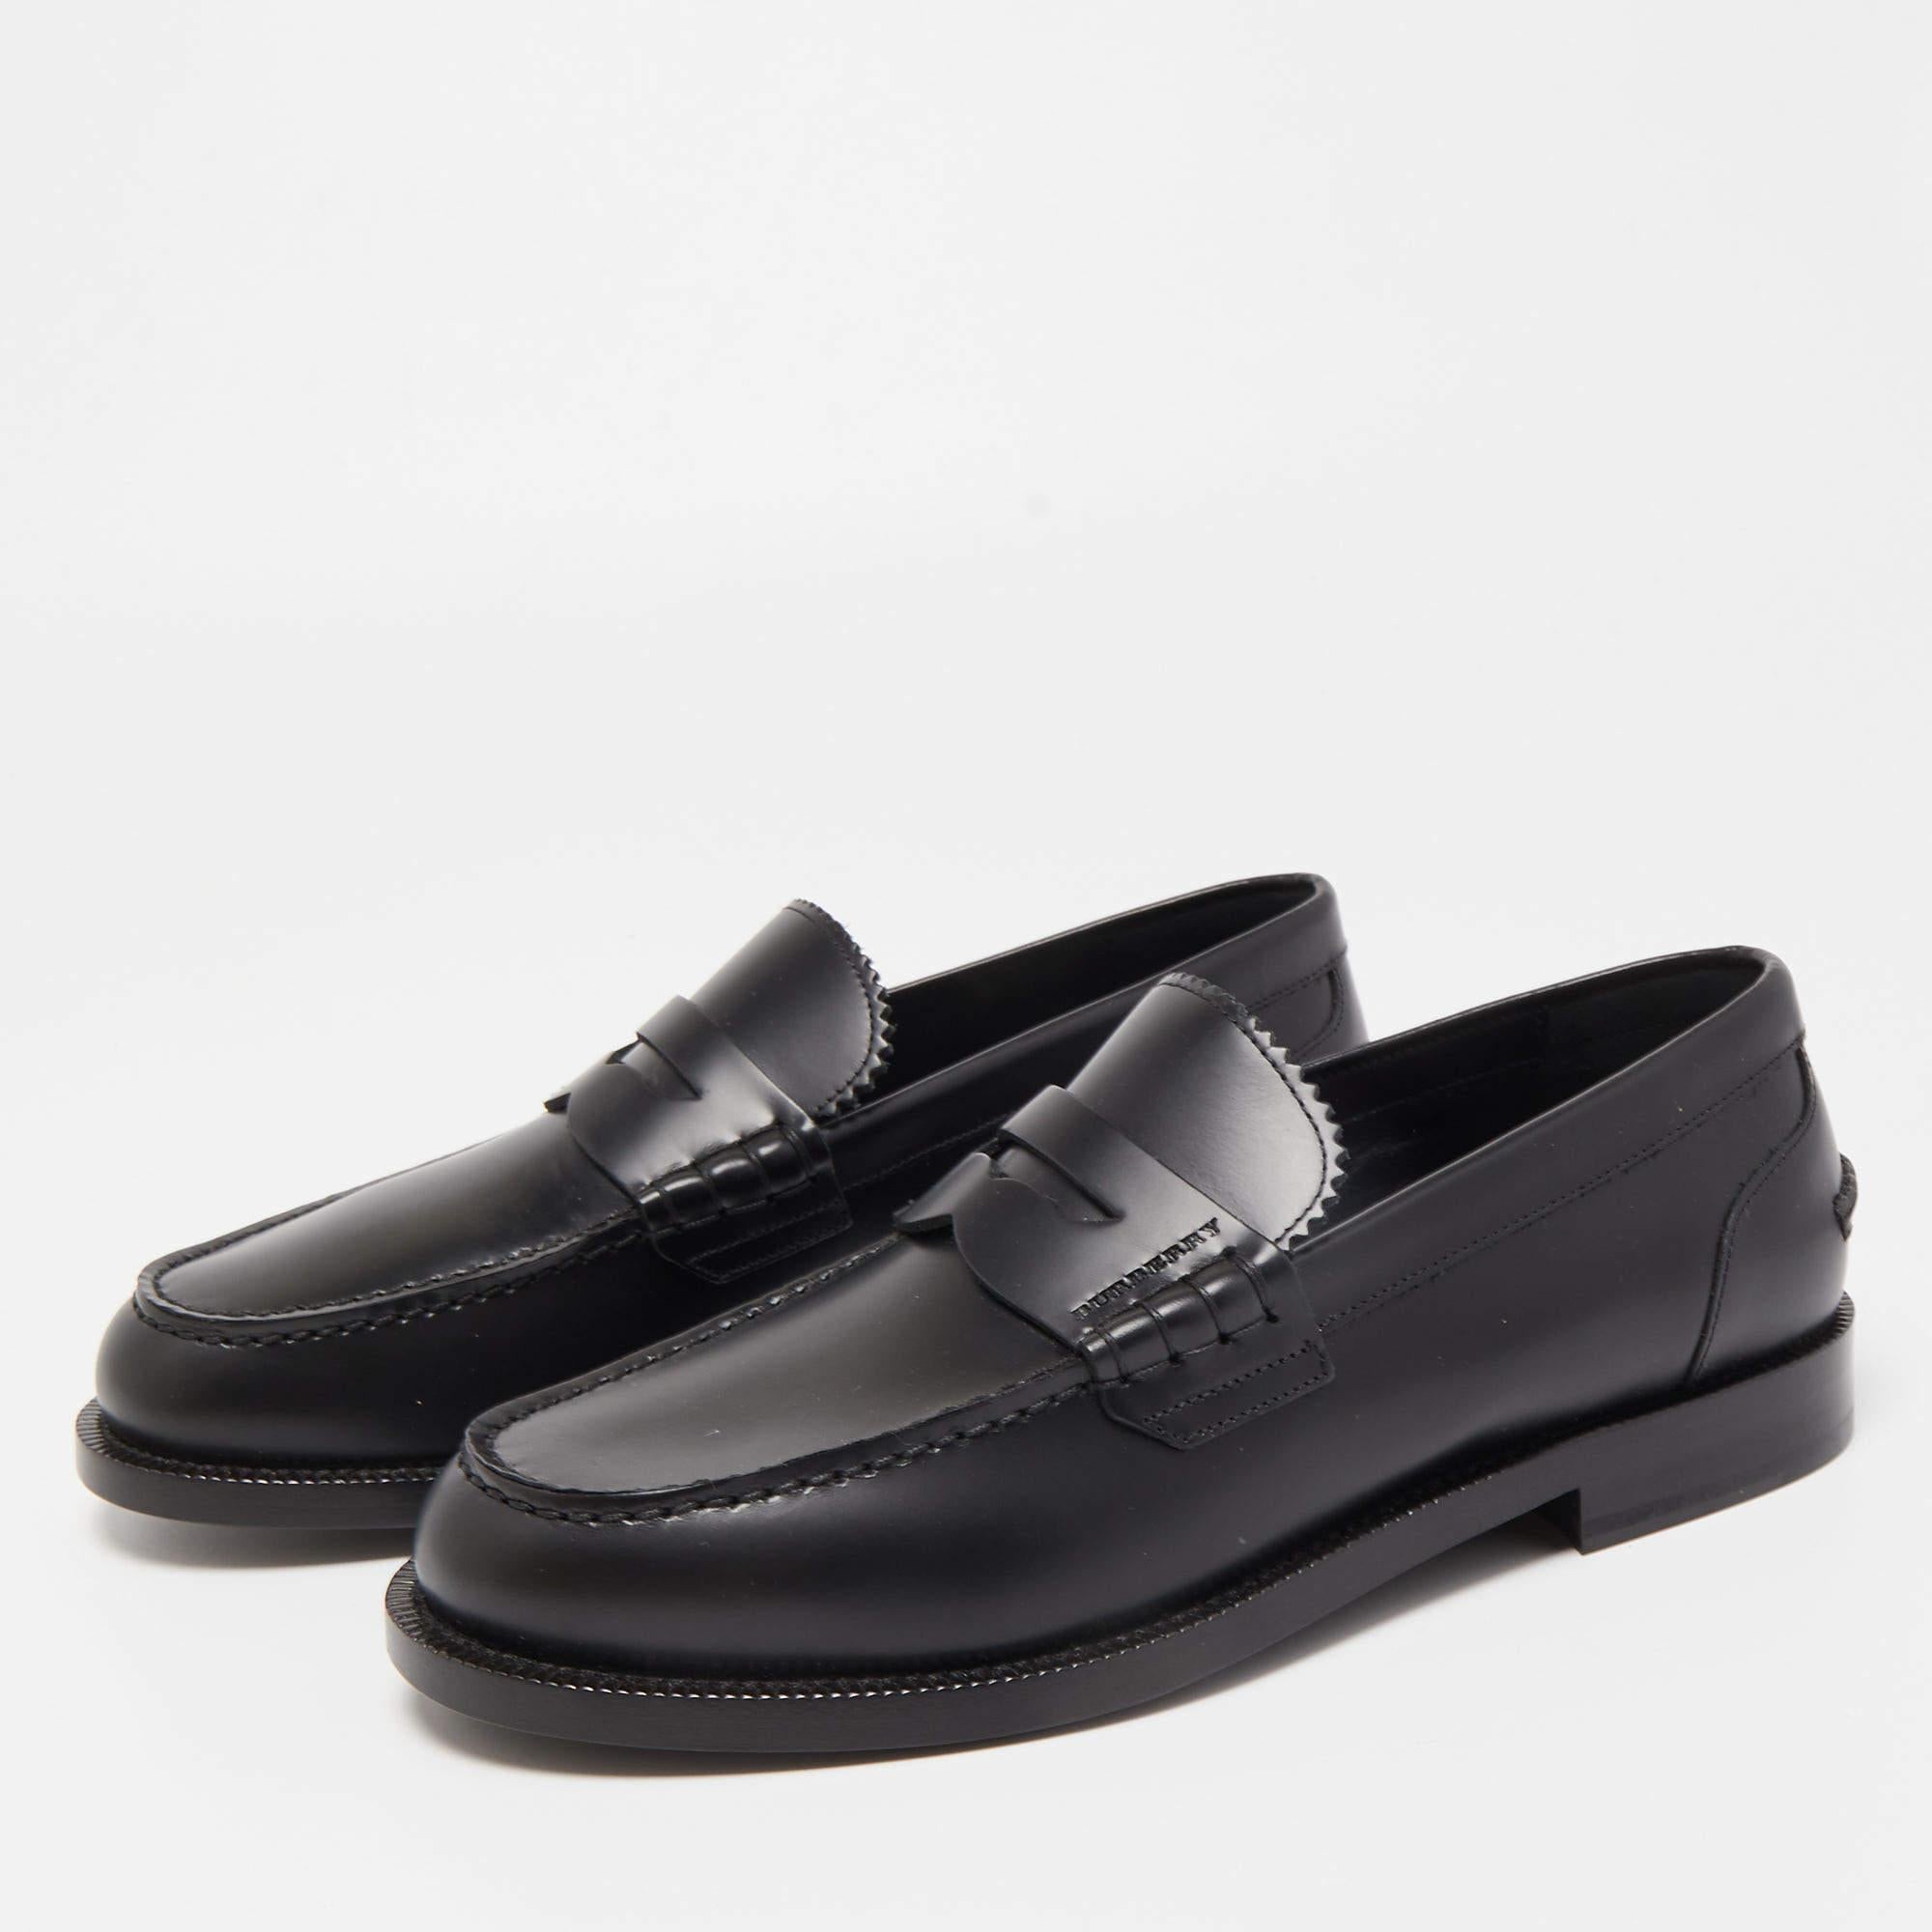 Burberry Black Leather Bedmont Penny Loafers Size 39.5 2